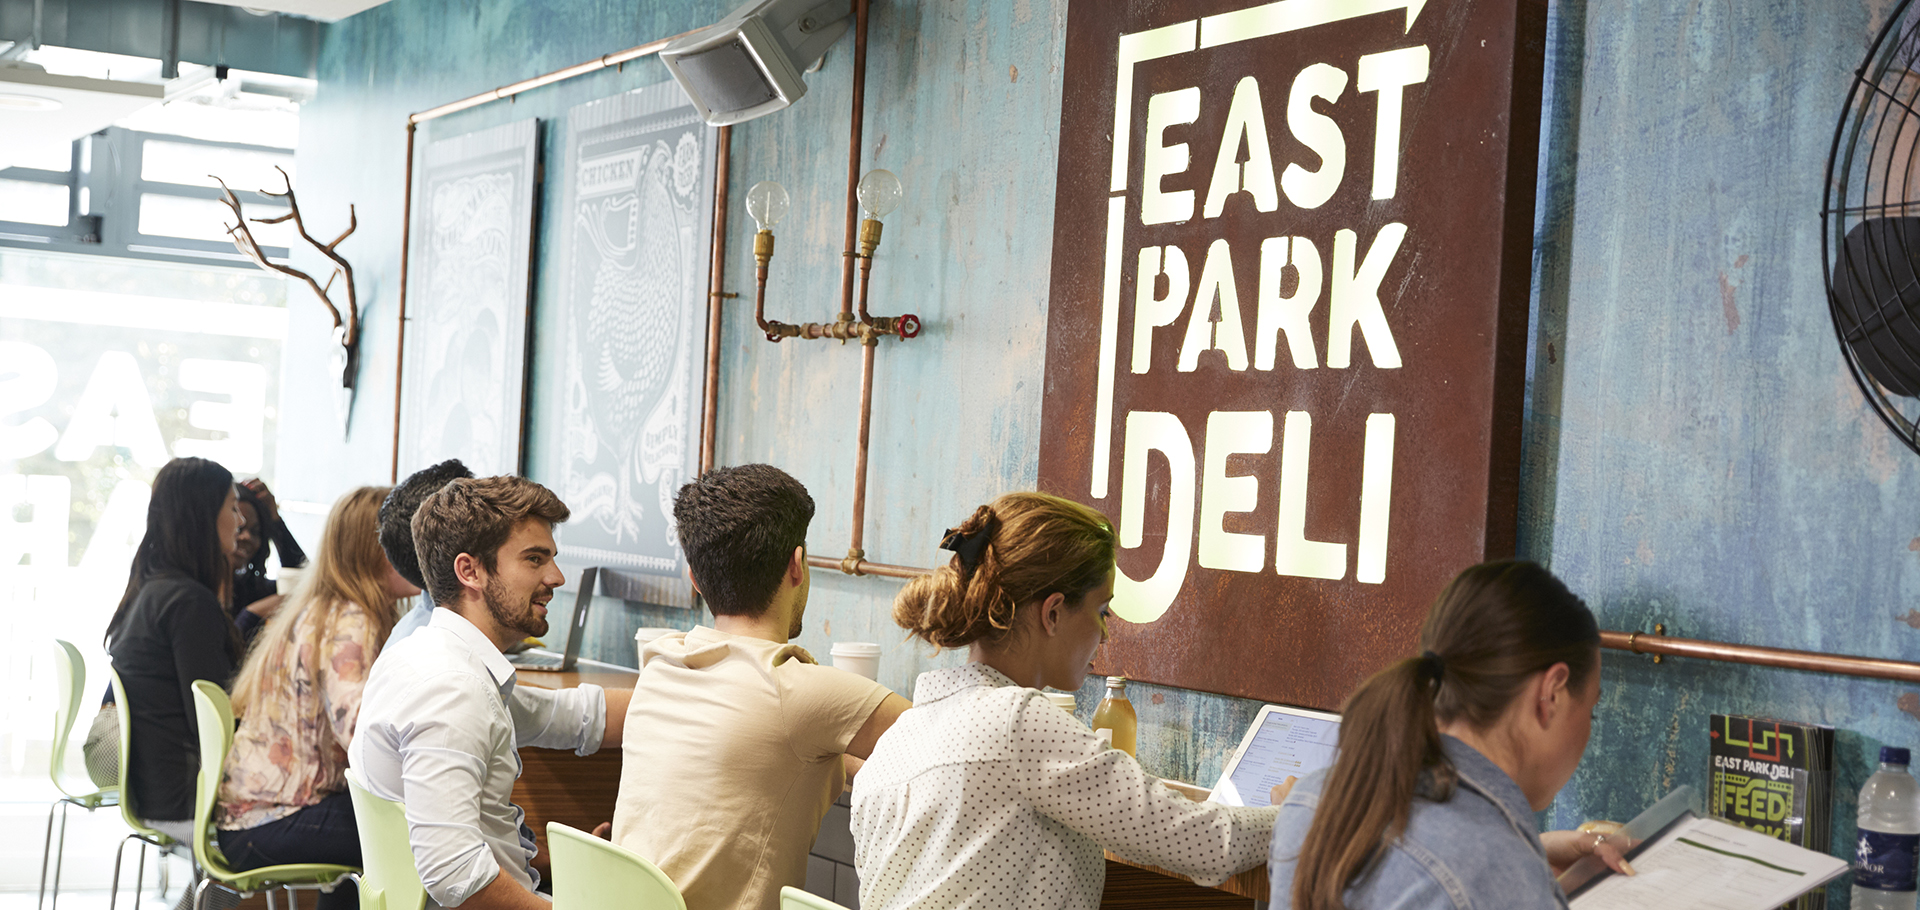 Students sitting in front of an East Park Deli sign